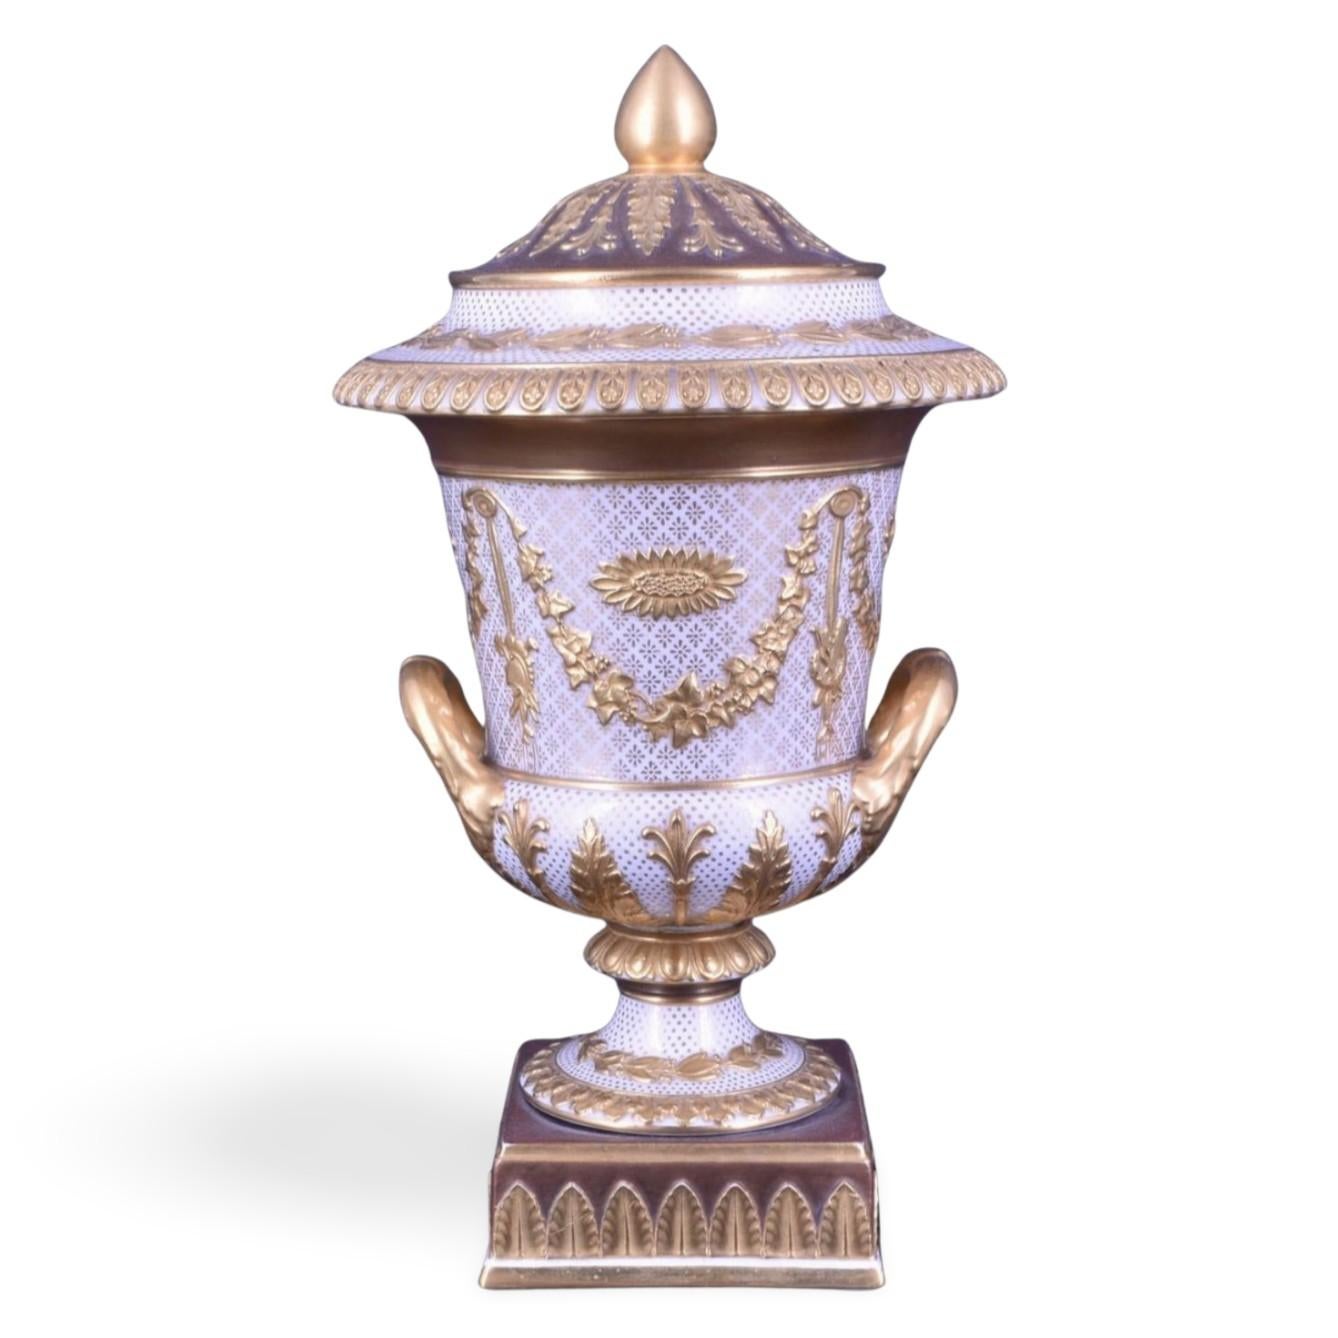 A campana vase in white & gilt Victoriaware. Very French in style, the decoration being a copy of Sevres. It works surprisingly well on the neoclassical shape.